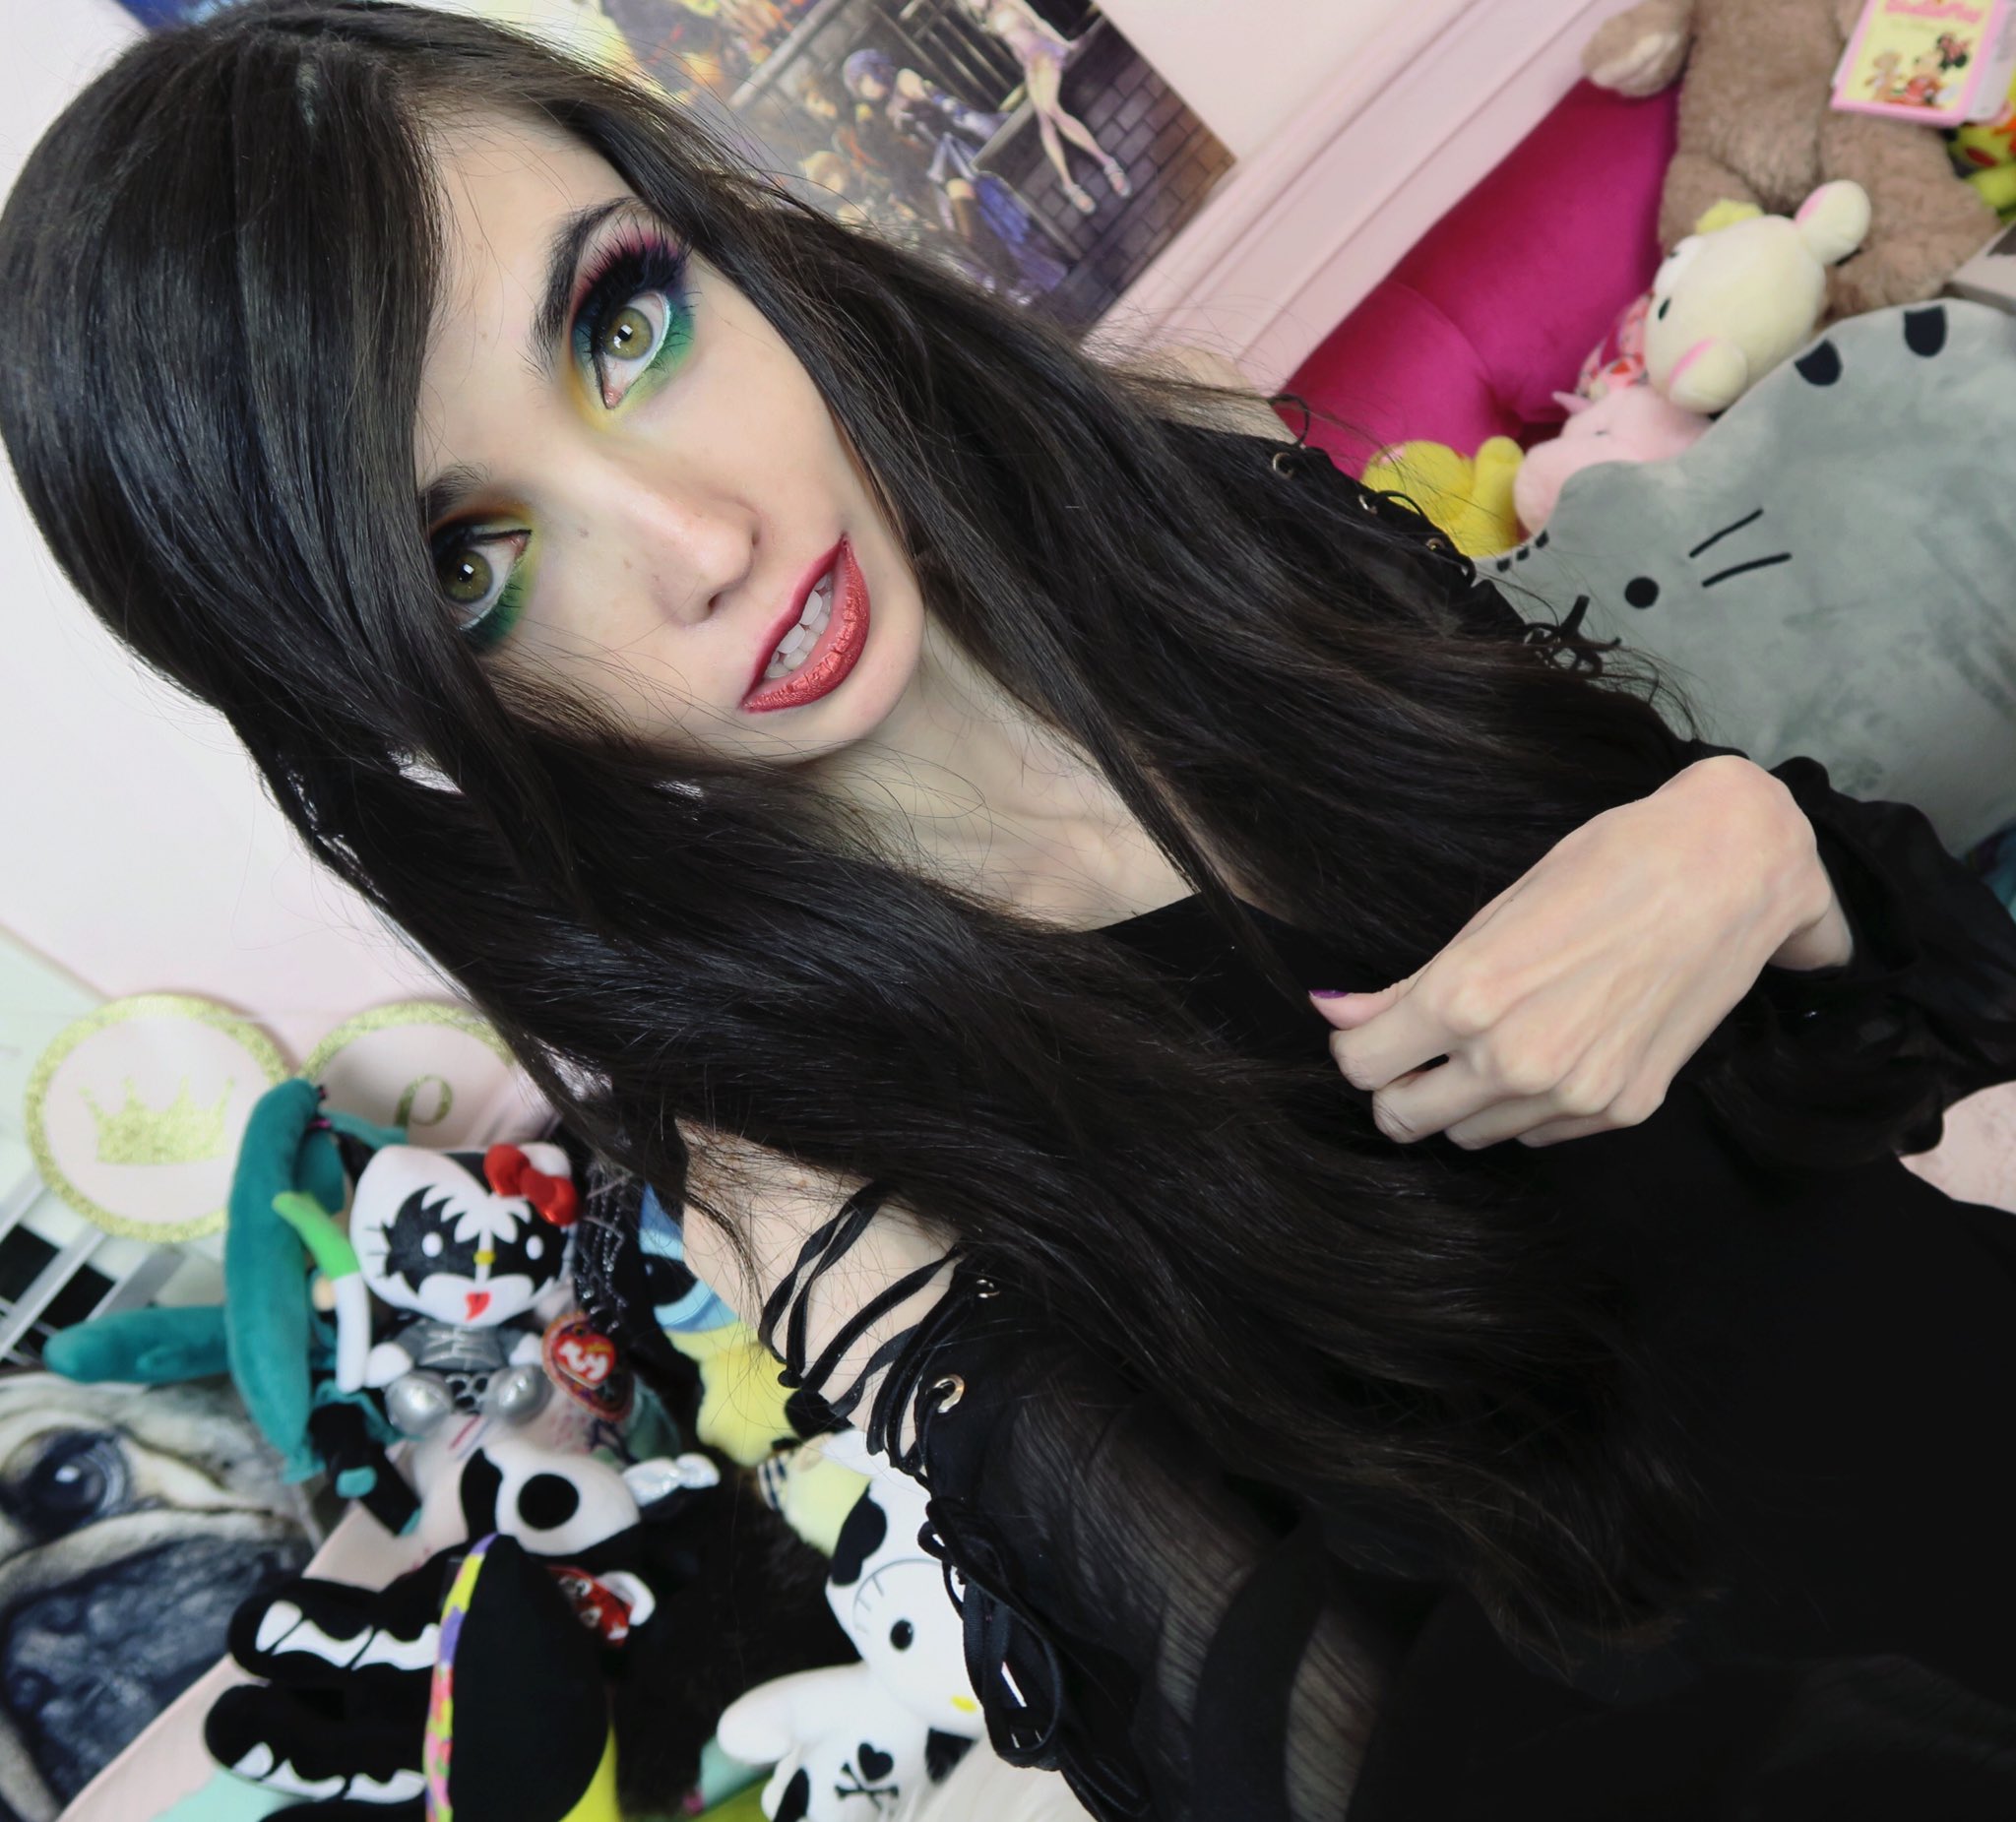 Eugenia Cooney on Twitter: "❤ 💛 https://t.co/eAob4fxns6" / T